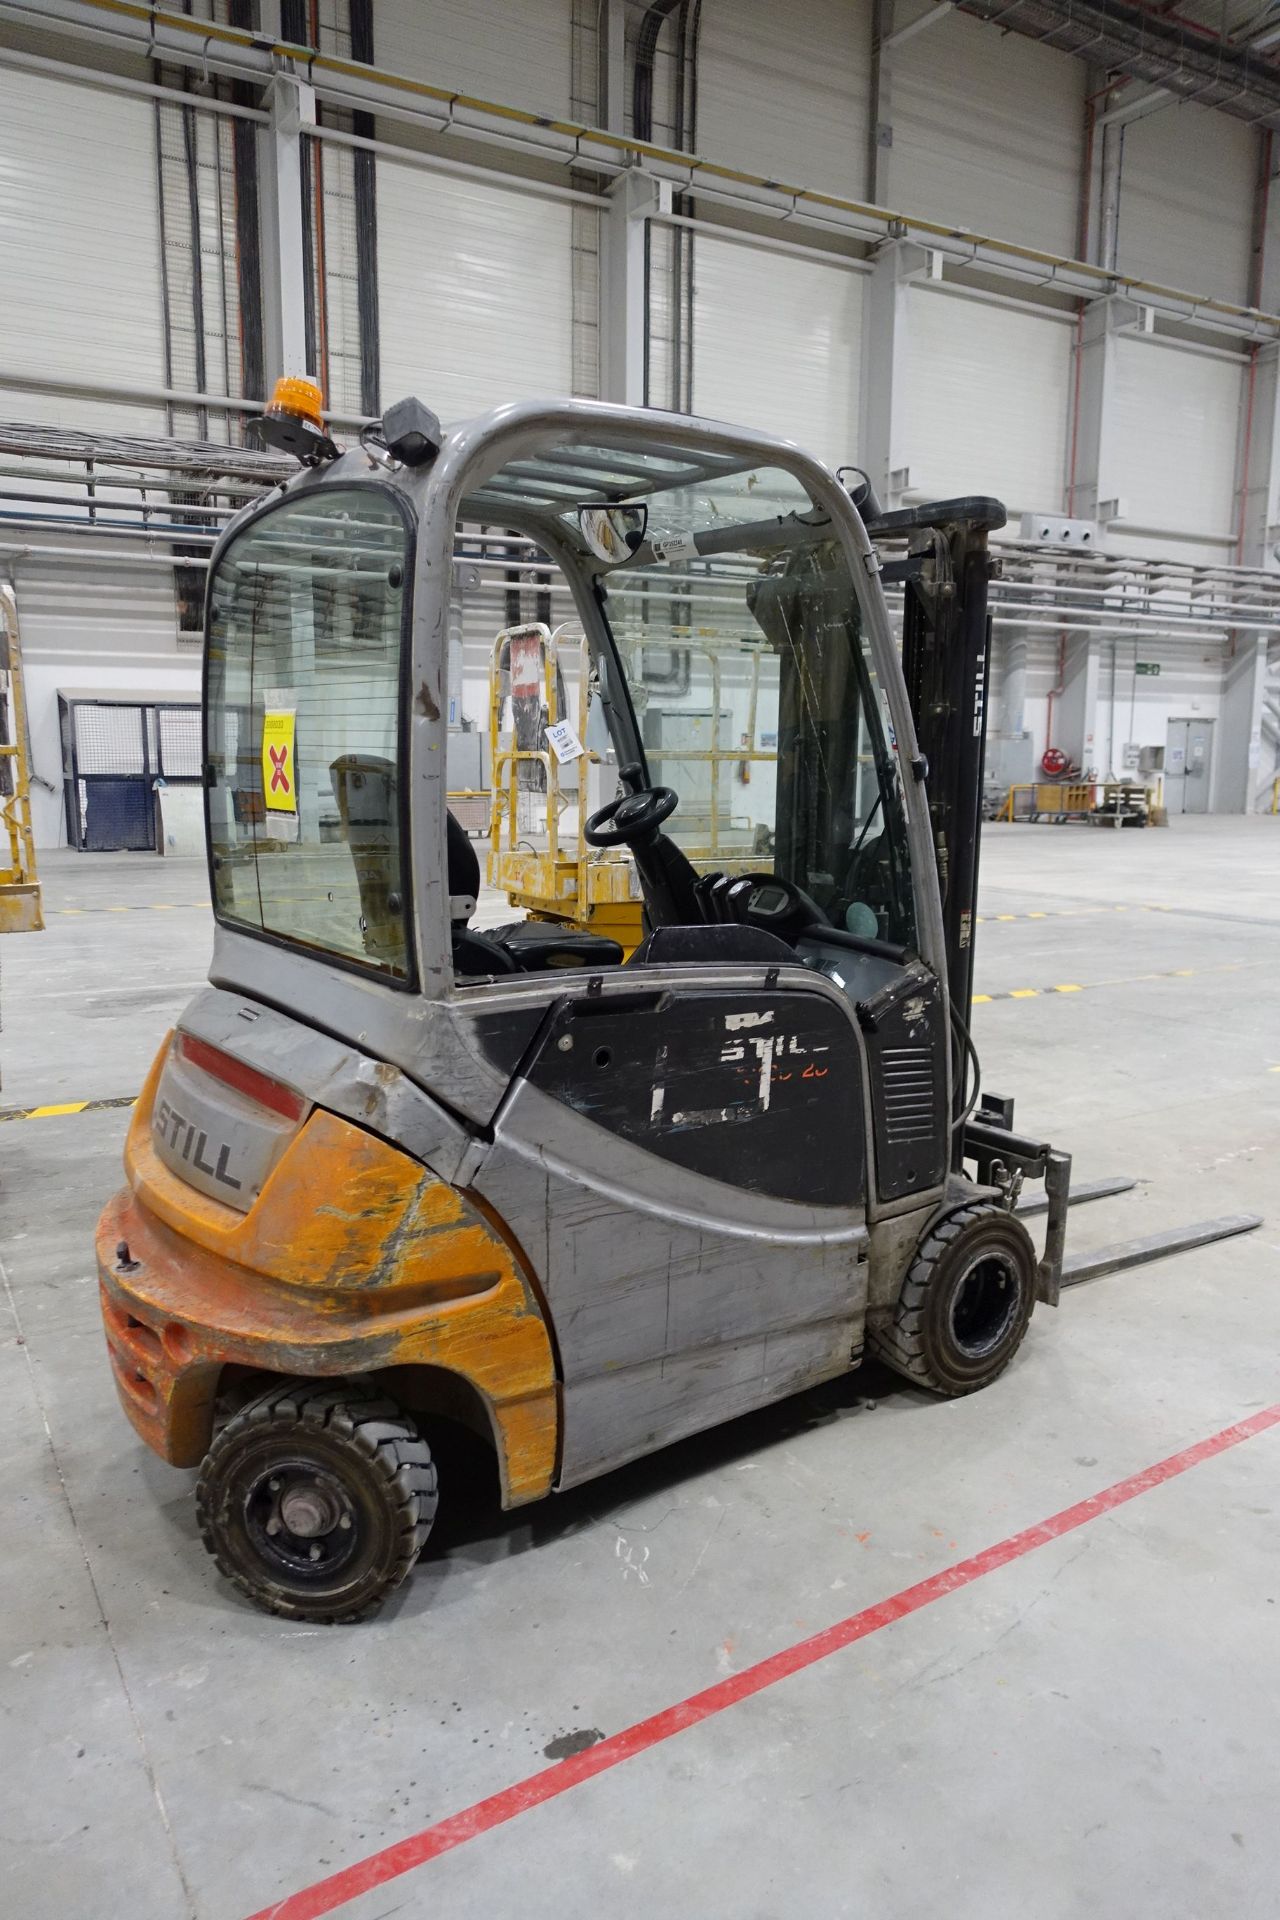 STILL RX20-20P Electric Forklift Truck, 2,000kg Capacity with Sideshift, Ser # 516216H00380 (2017) - Image 4 of 44